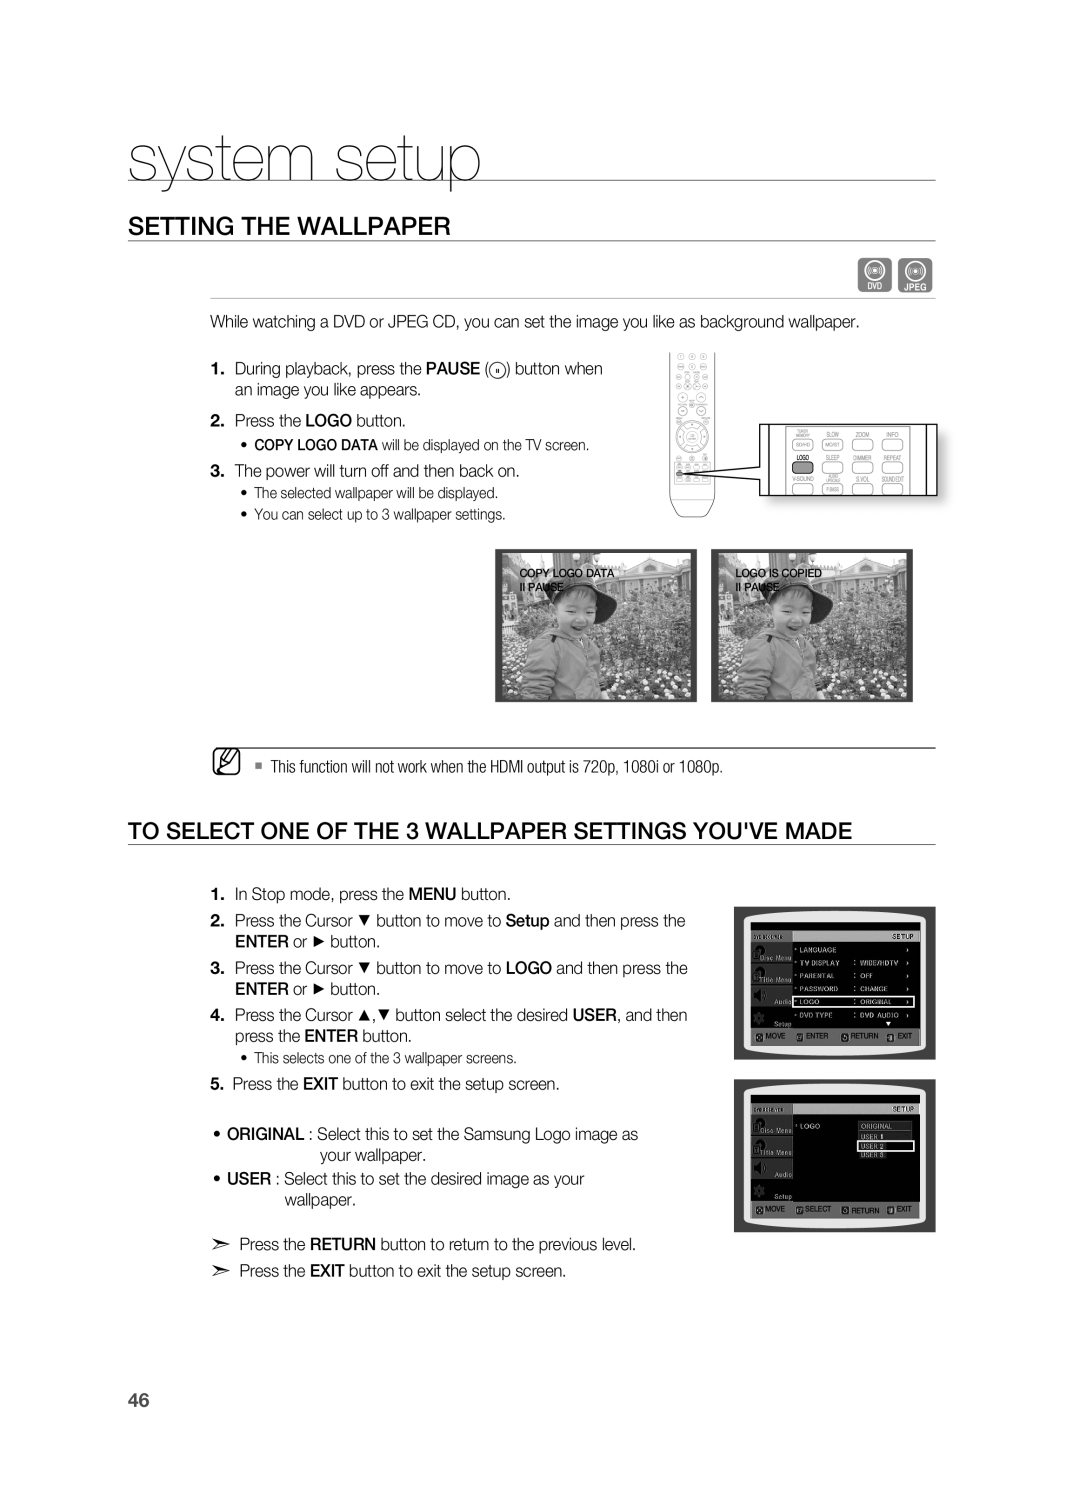 Sony HT-X810 user manual SETTING THE WAllPAPEr, TO SElECT ONE OF THE 3 WAllPAPEr SETTINGS YOUVE MADE, system setup 